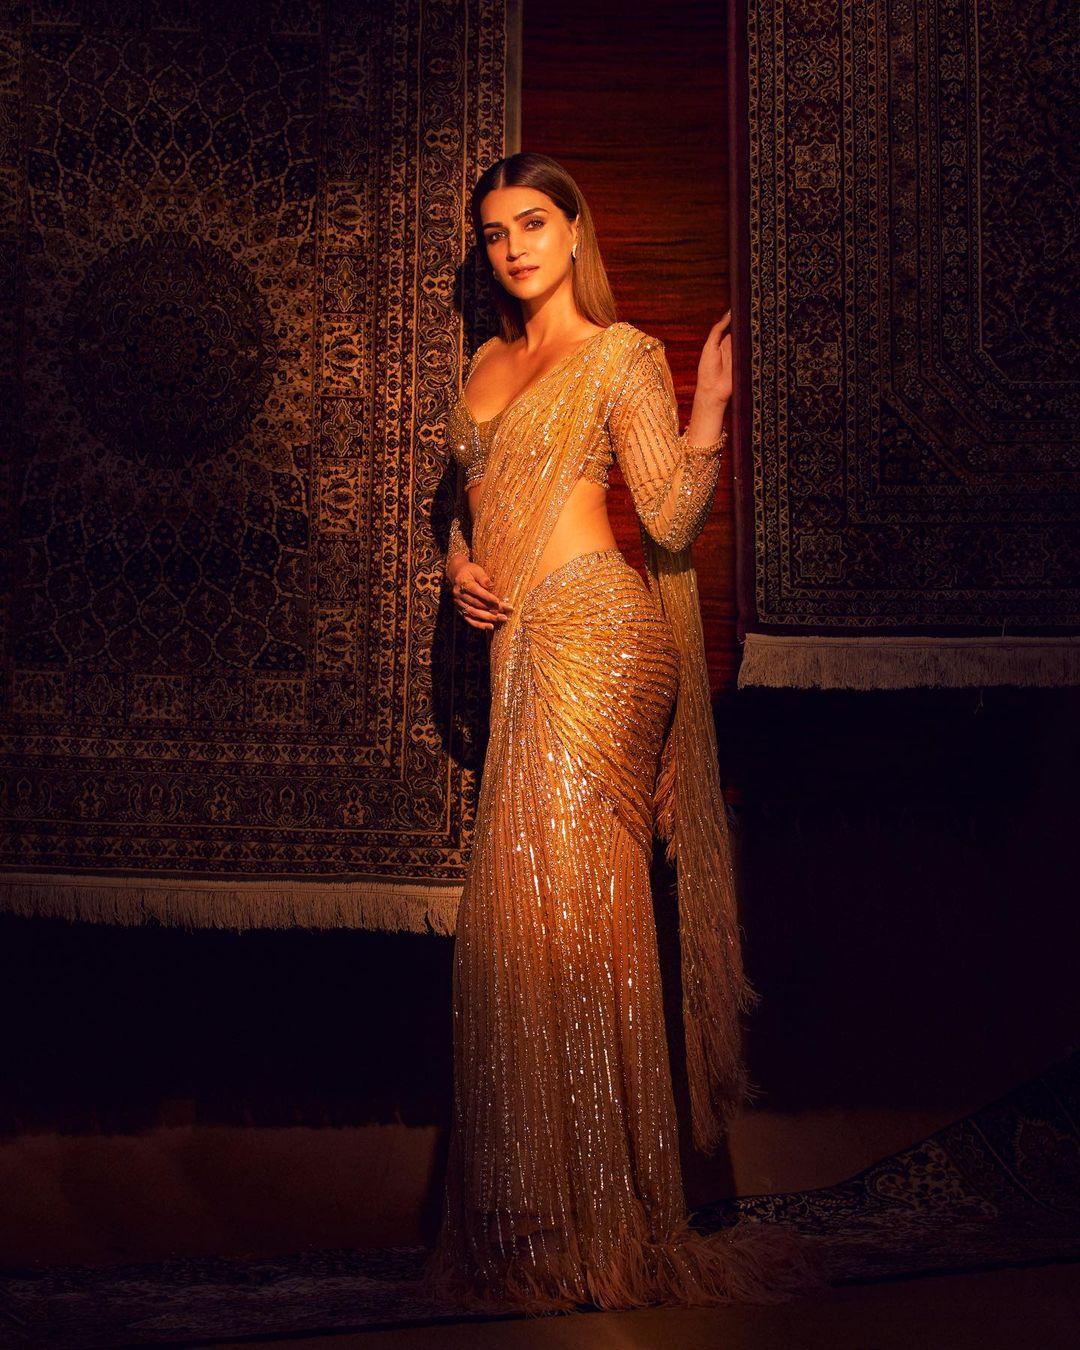 In yet another appearance, Kriti Sanon aced her look, and this is a must-have outfit if you are going to a friend's place for Holika Dahan. The actress wore a stunning golden saree and paired it with a matching blouse